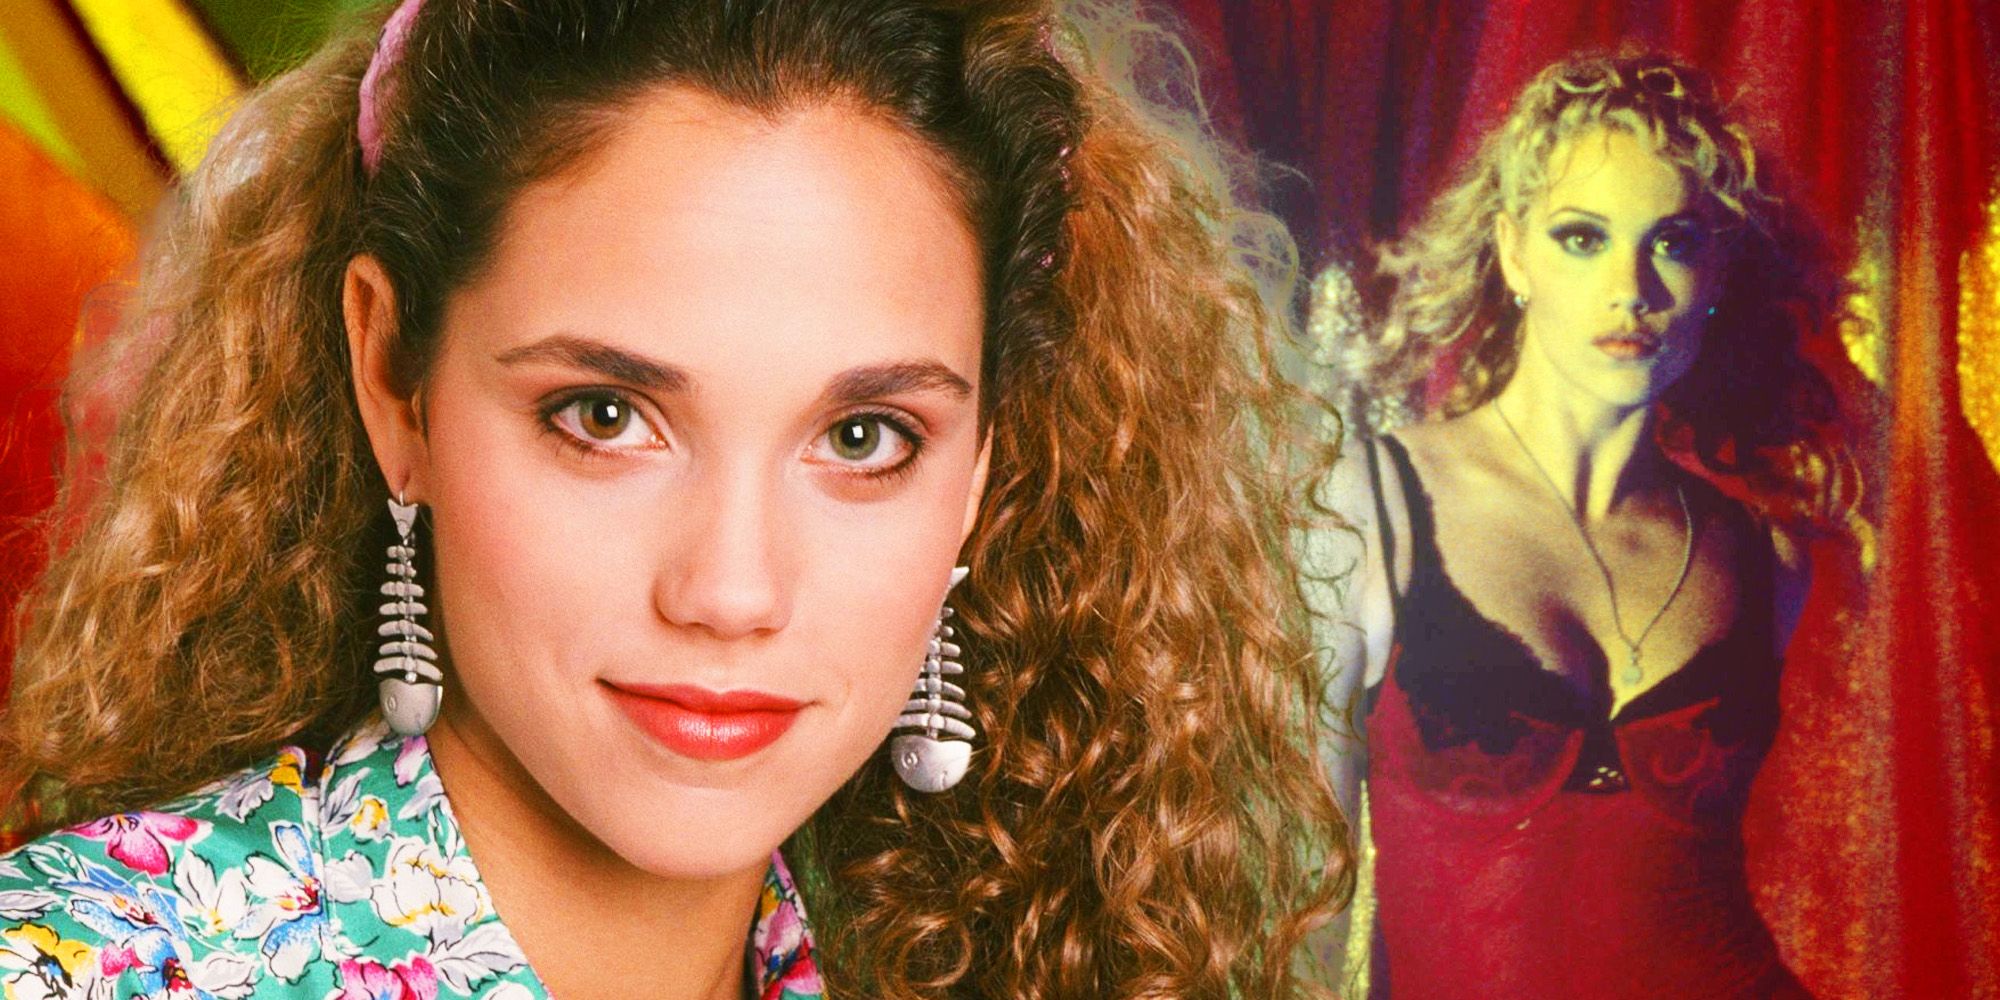 Elizabeth Berkley as Jessie in Saved by the Bell and as Nomi in Showgirls.